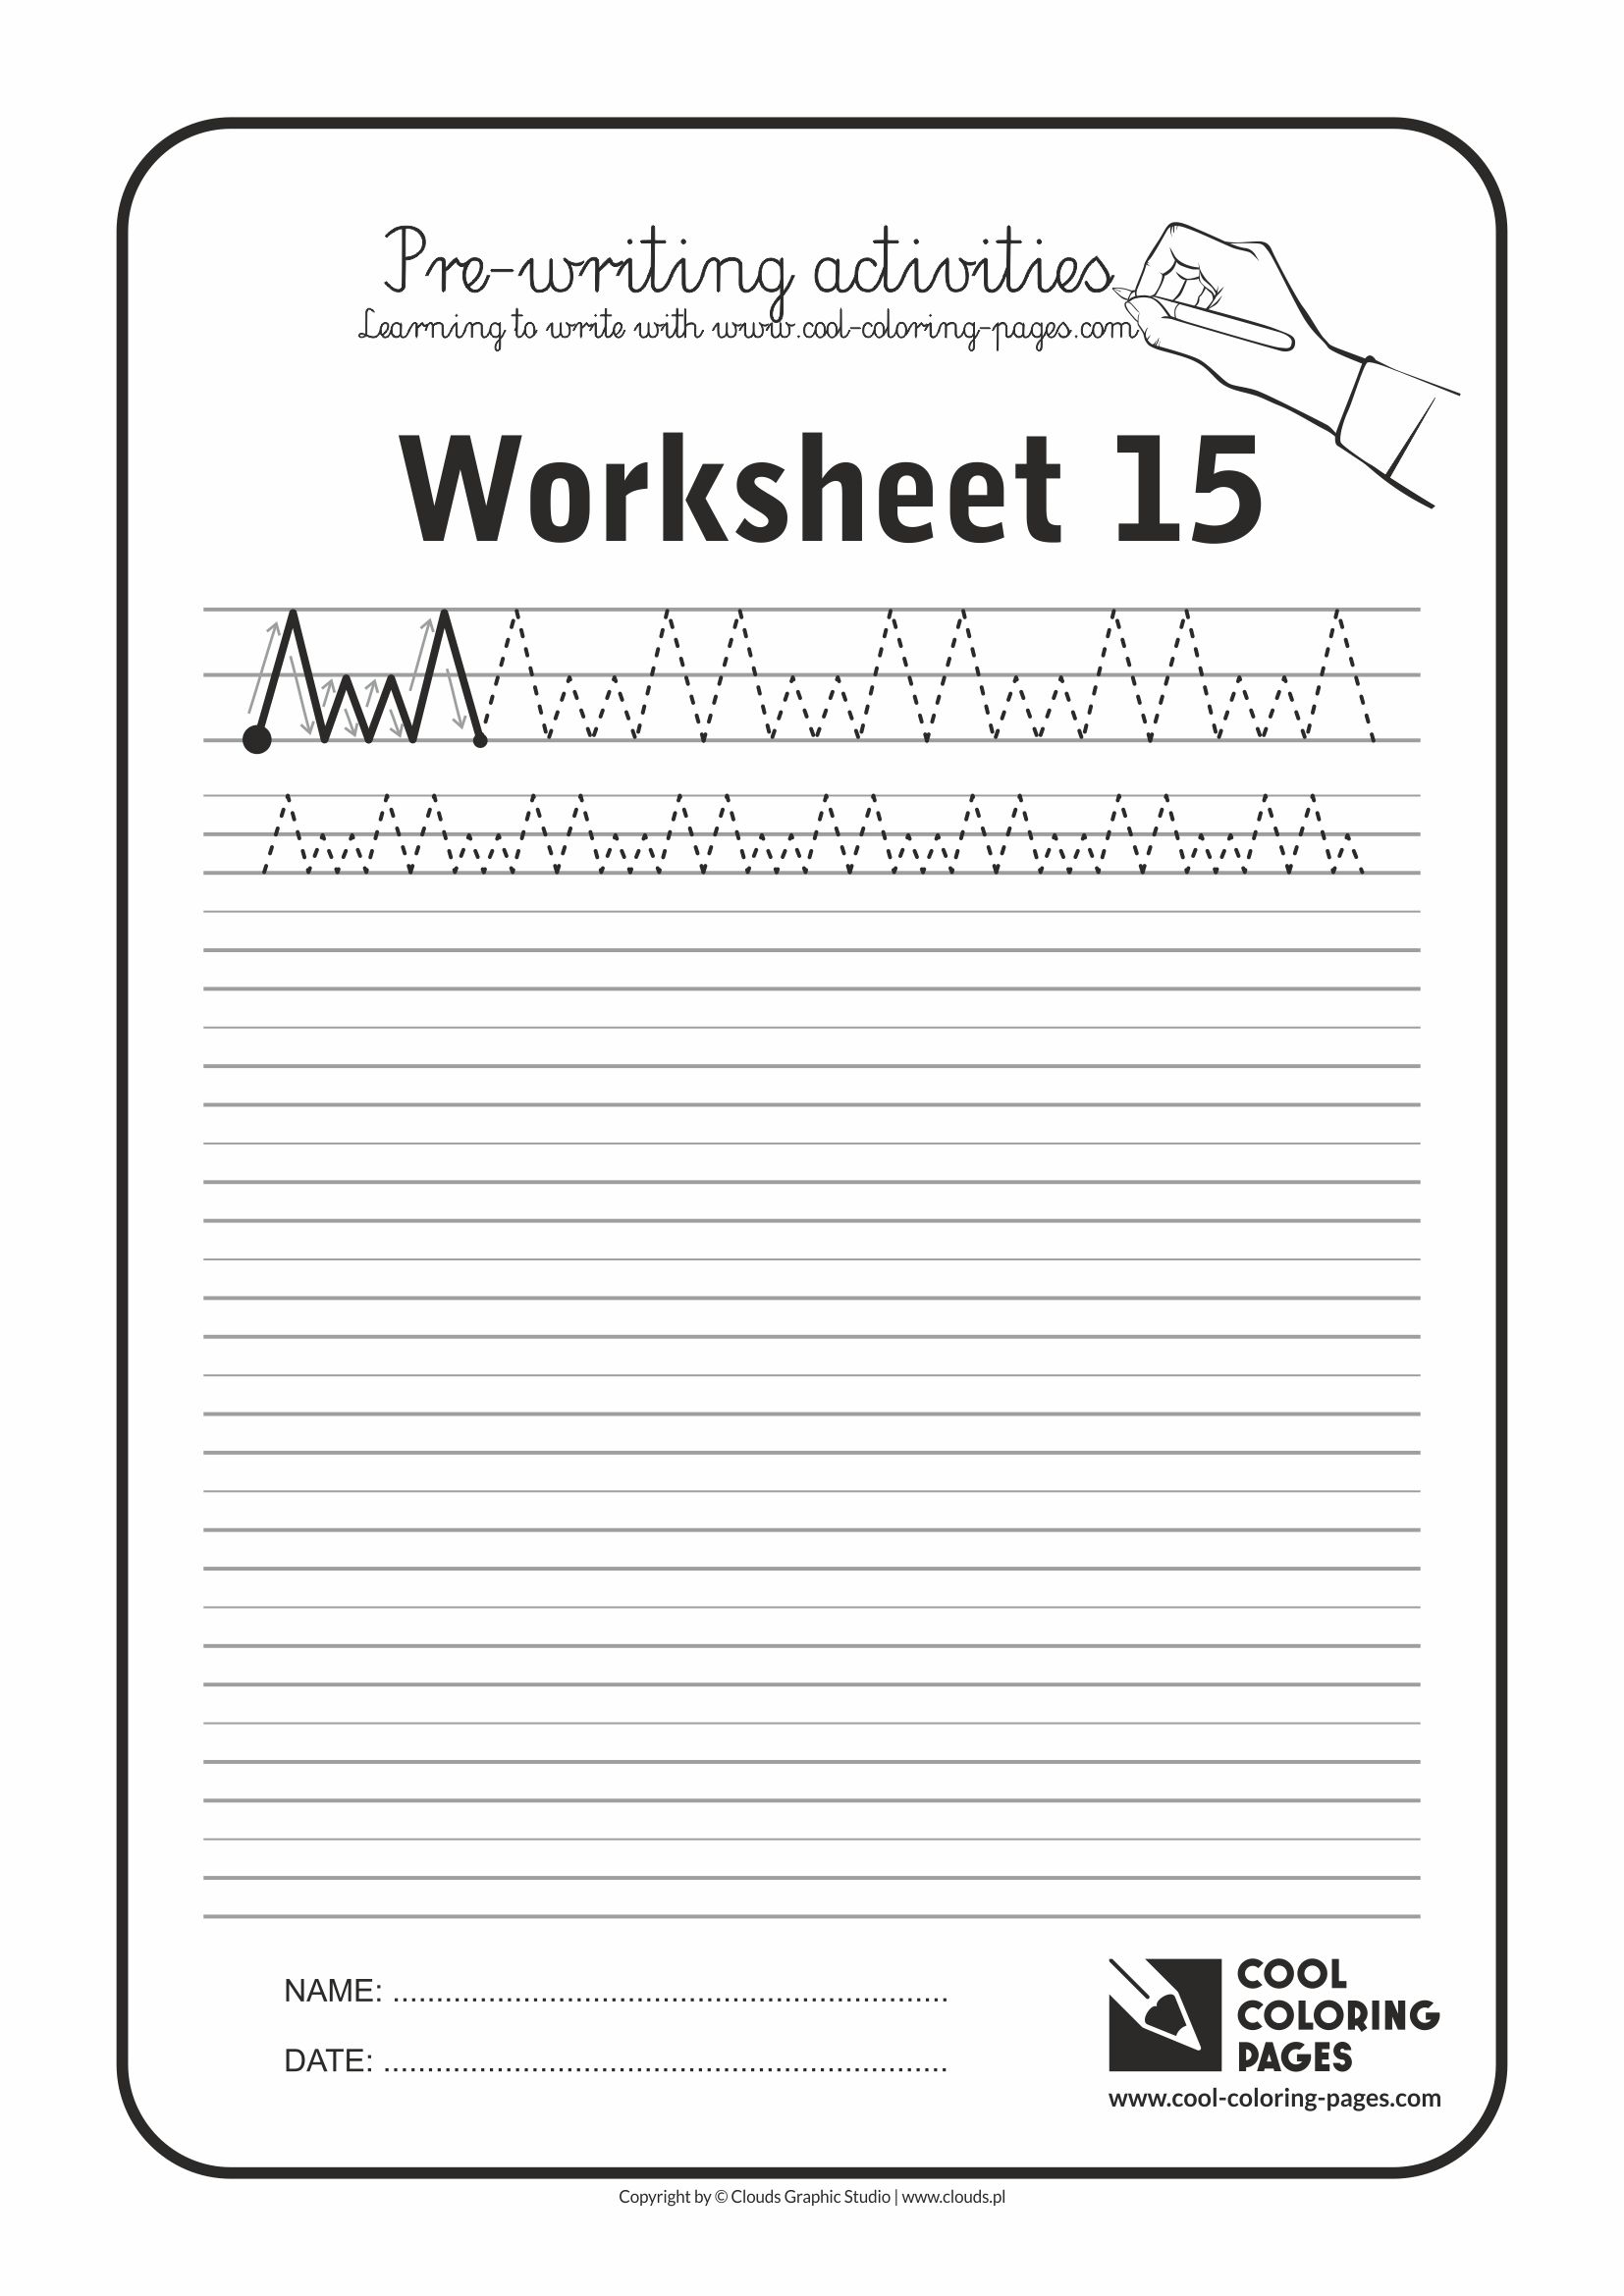 Cool Coloring Pages / Pre-writing activities / Worksheet no.15